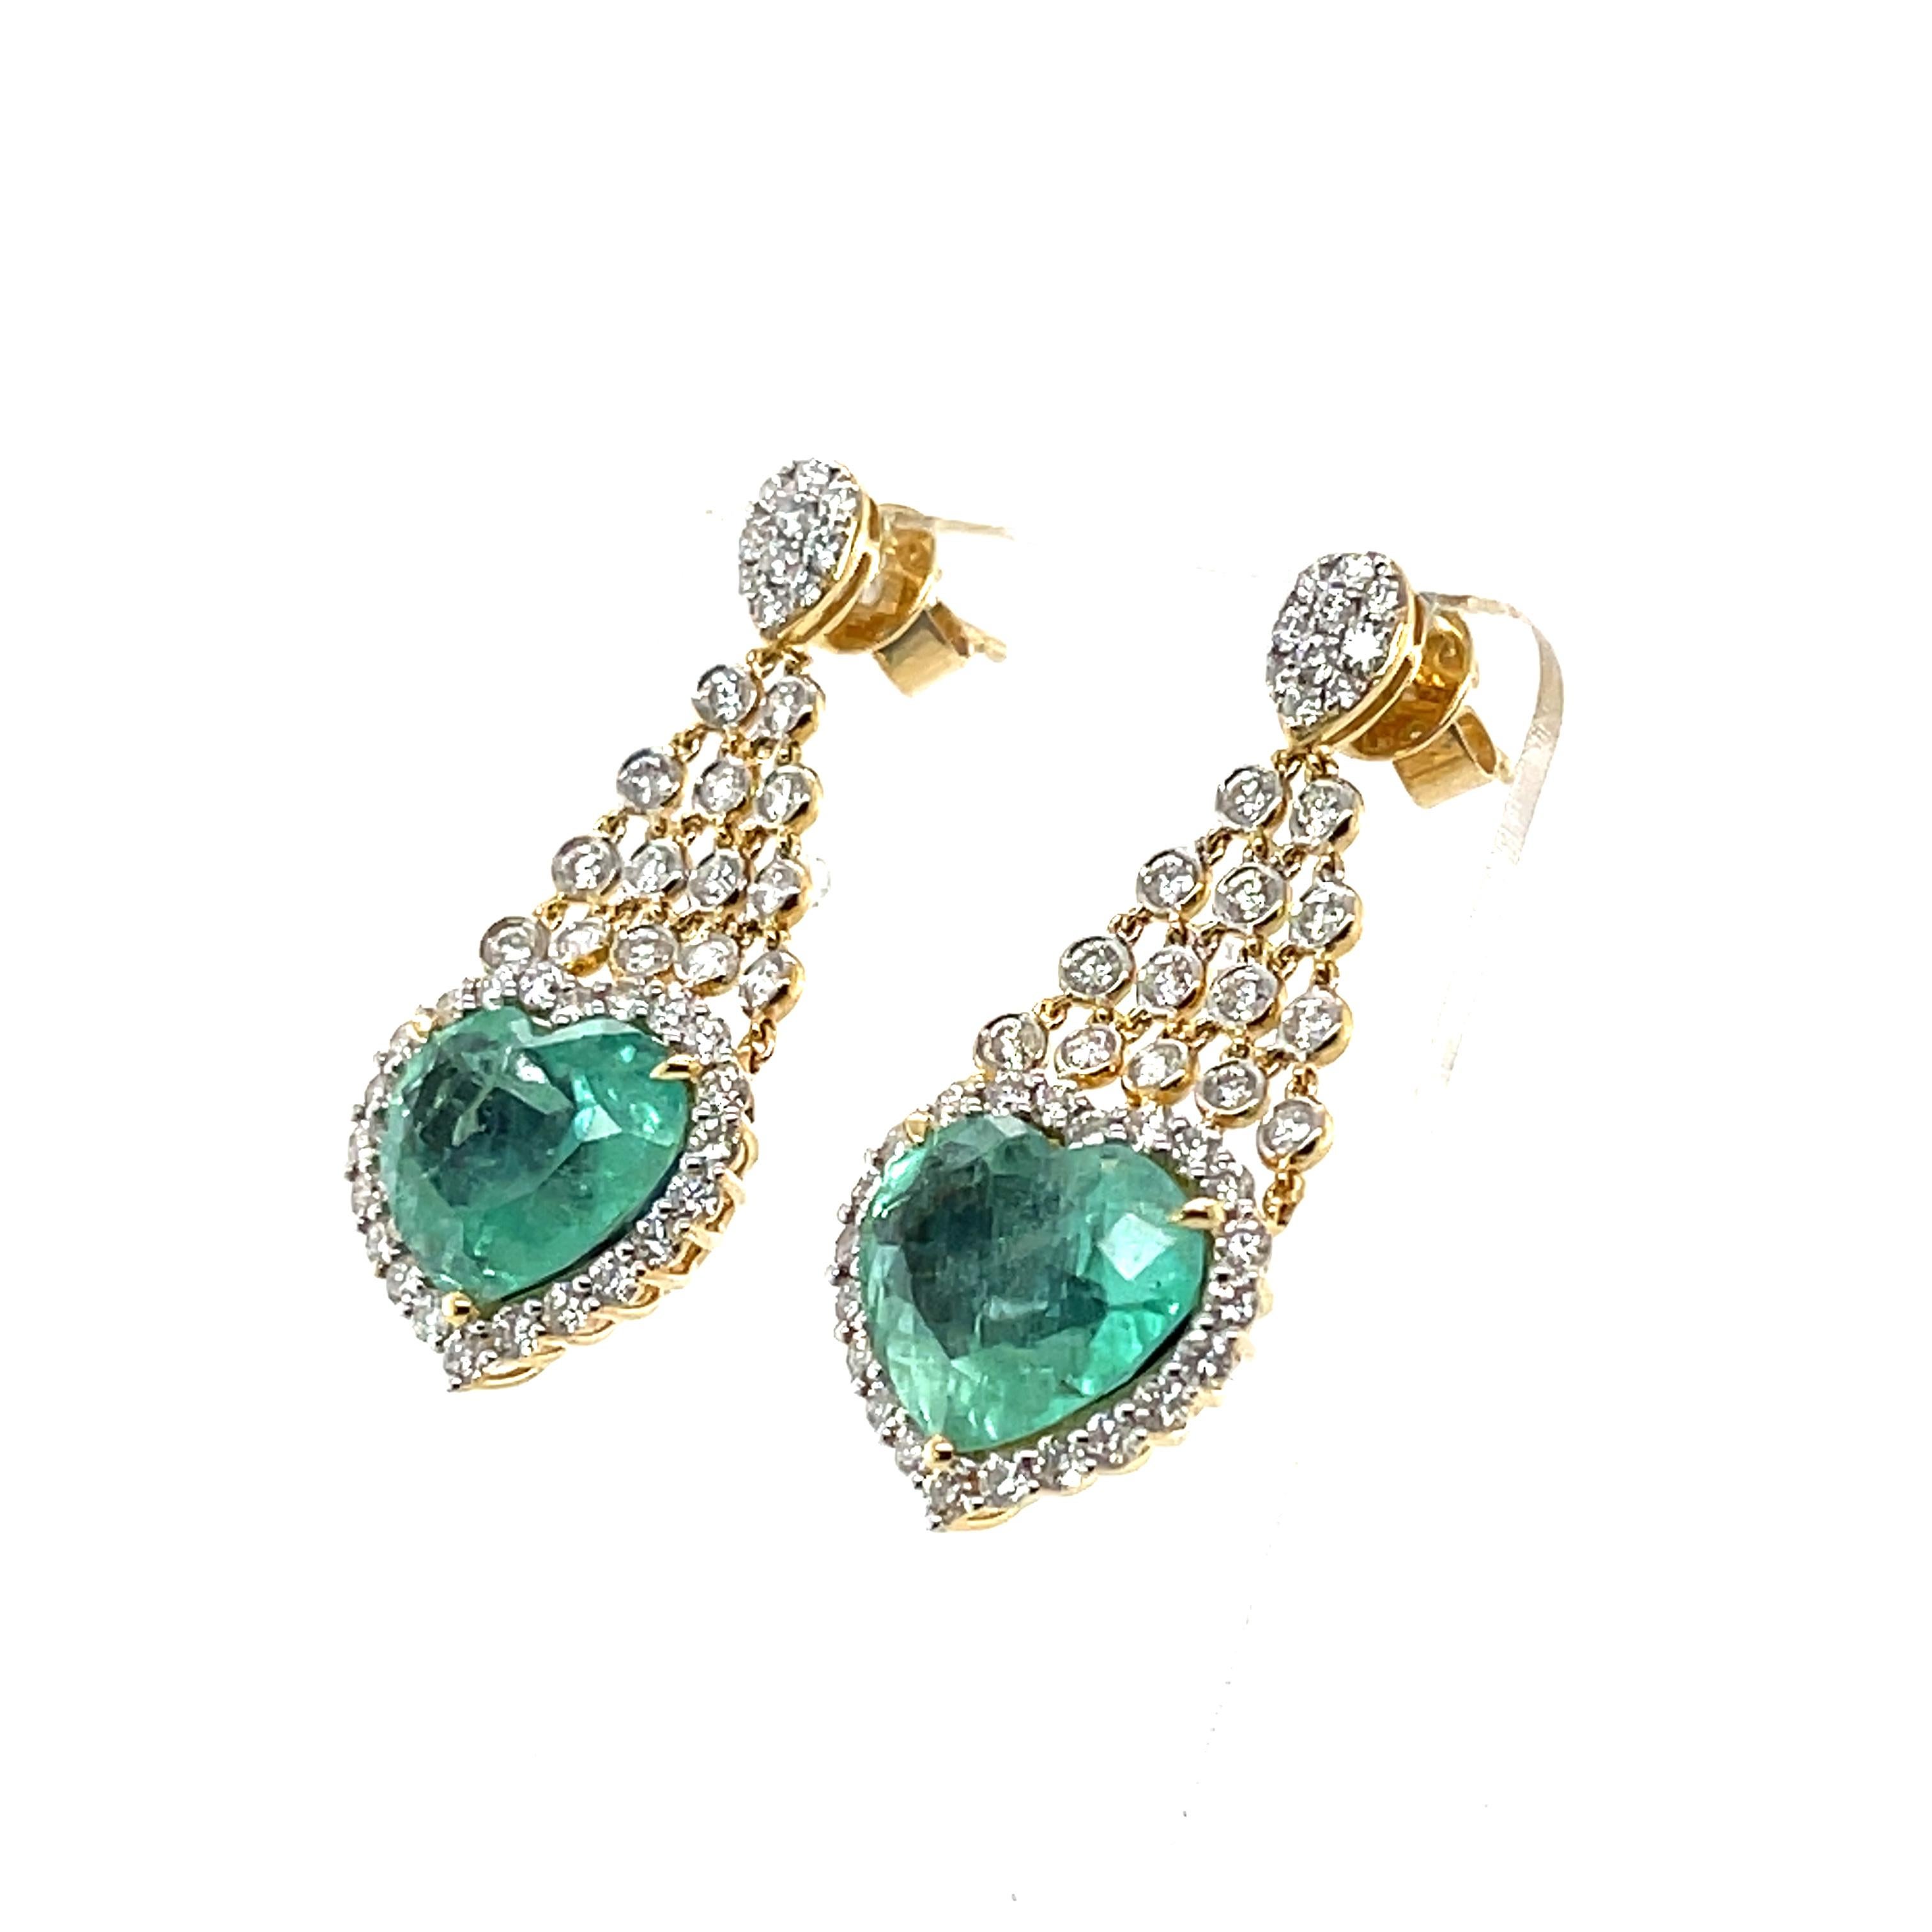 Pair of Heart cut colombian (based on my opinion) emeralds, crafted with eighteen karat yellow gold , featuring a beautiful selection of ninety-two round brilliant cut diamonds. complimented with a polished finished design.

 Emerald weight: